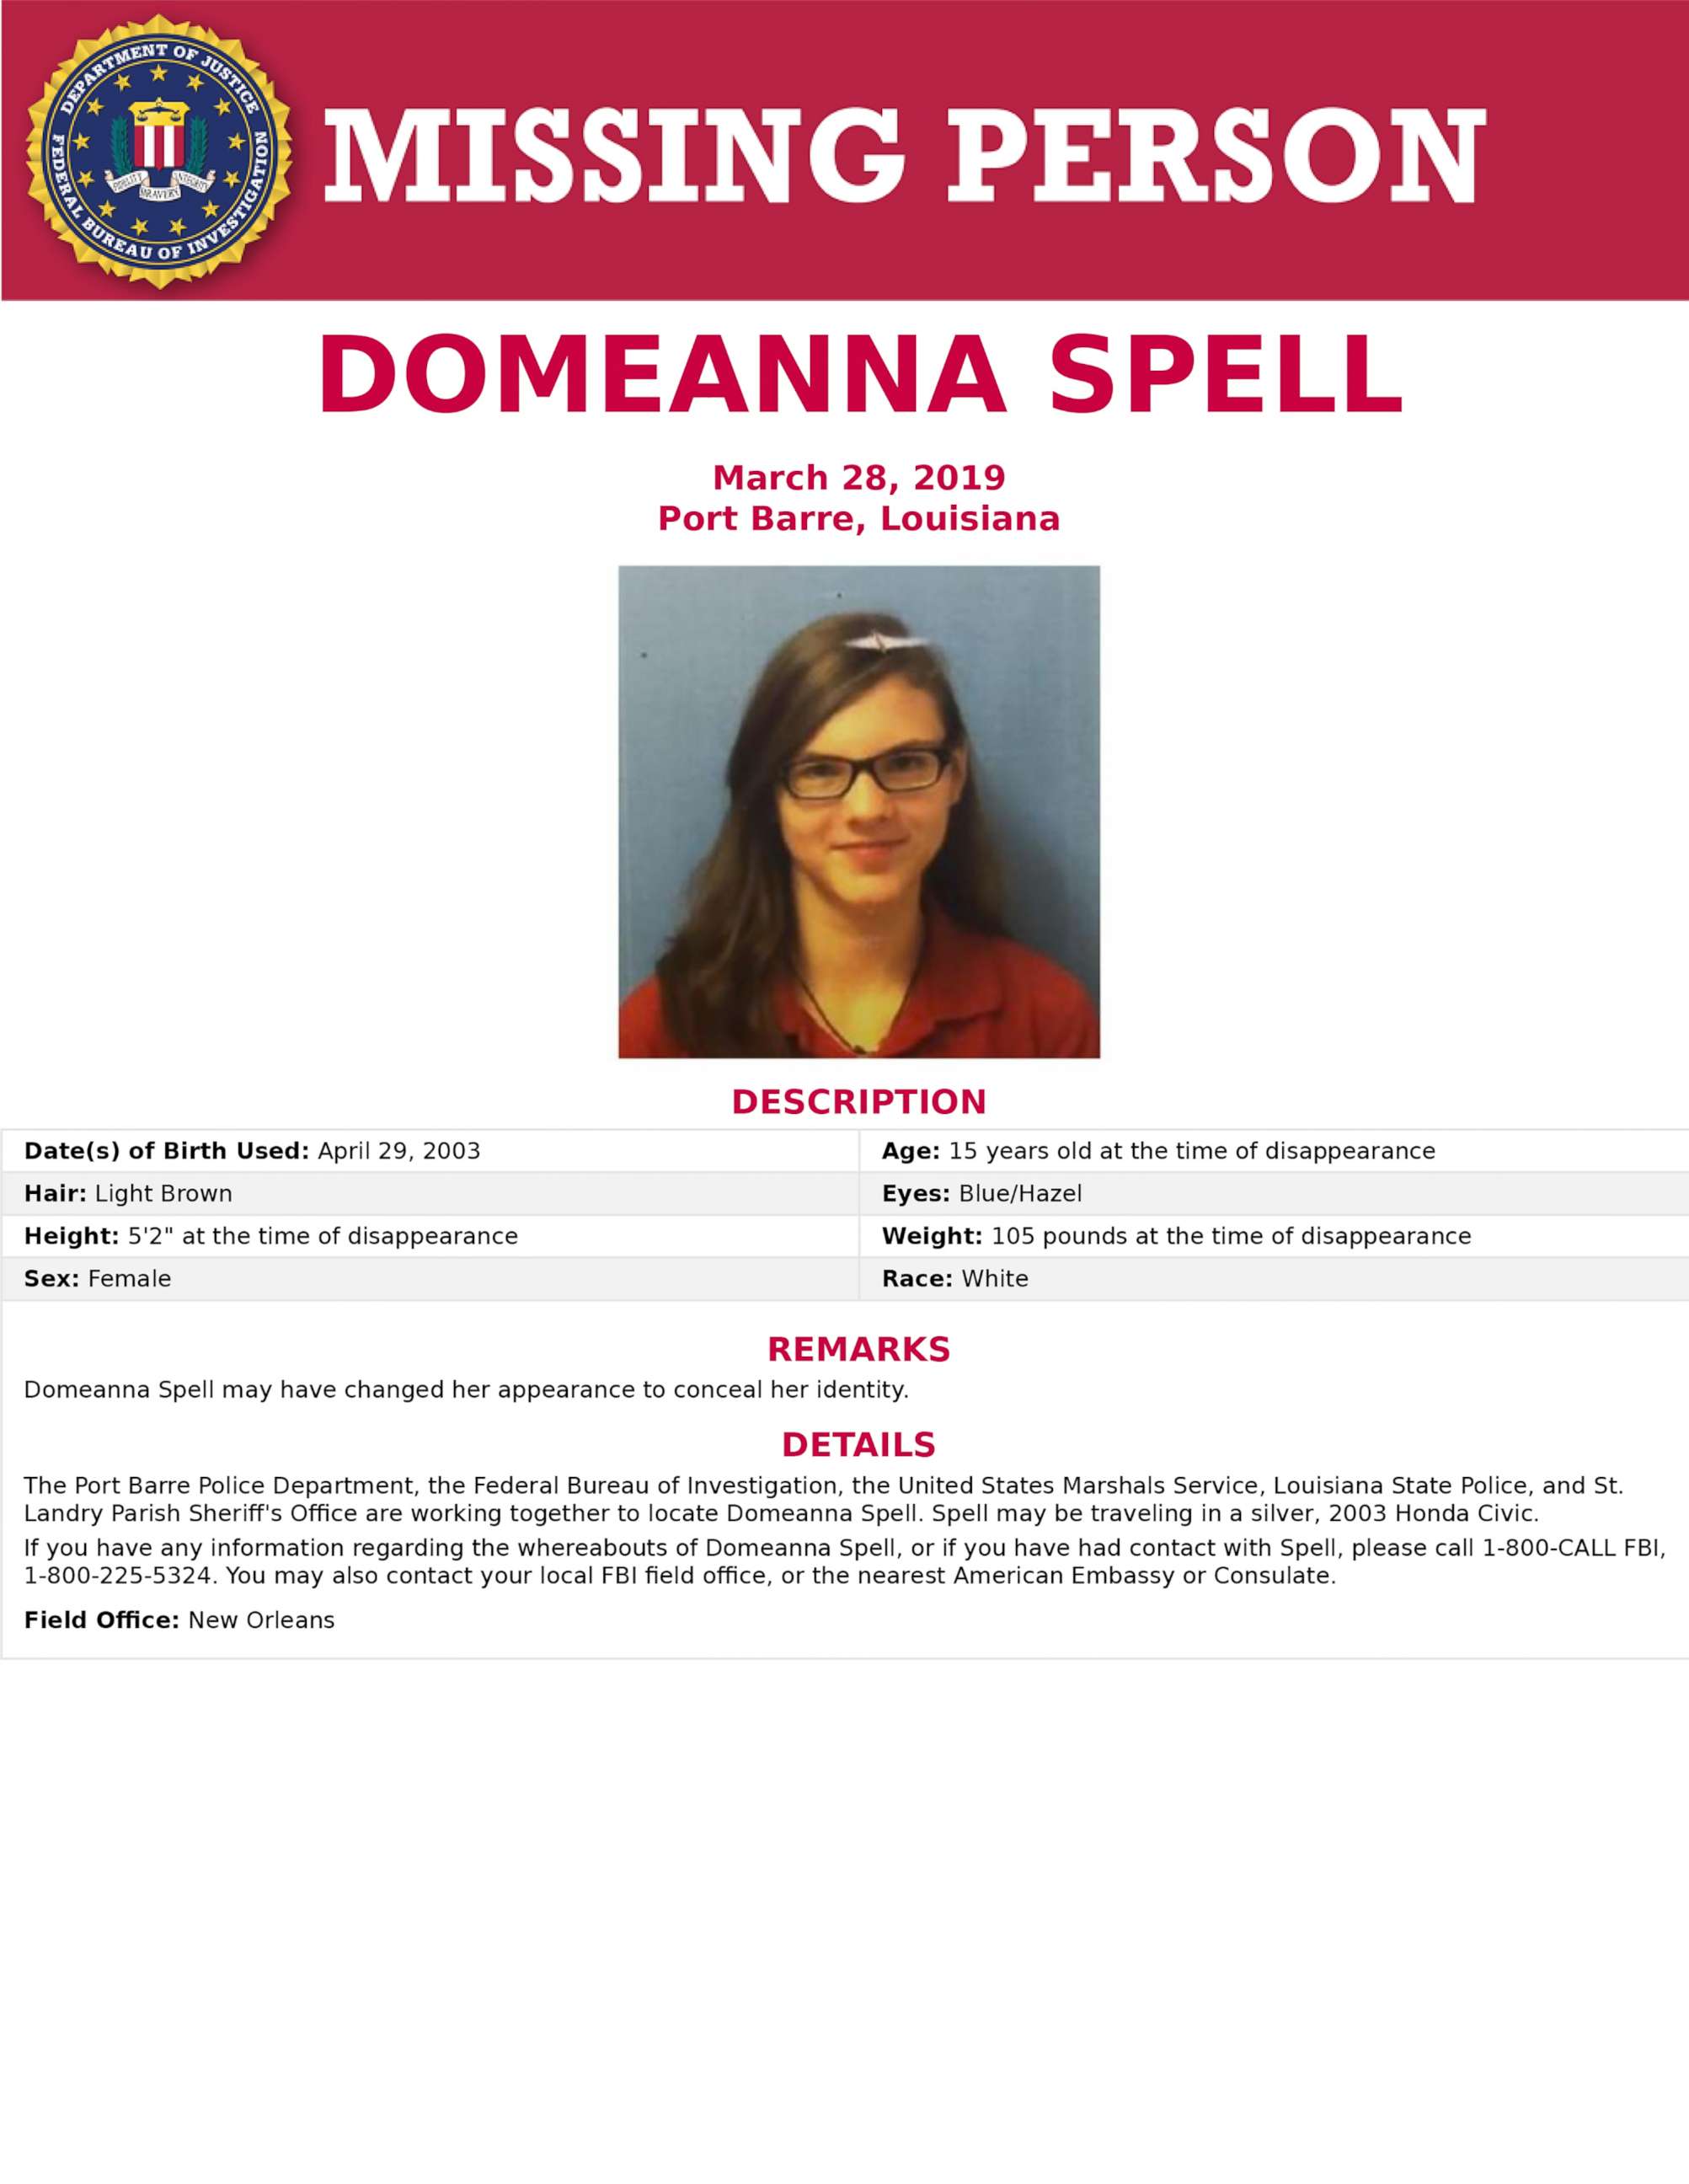 PHOTO: Domeanna Spell is pictured in this poster released by the FBI.